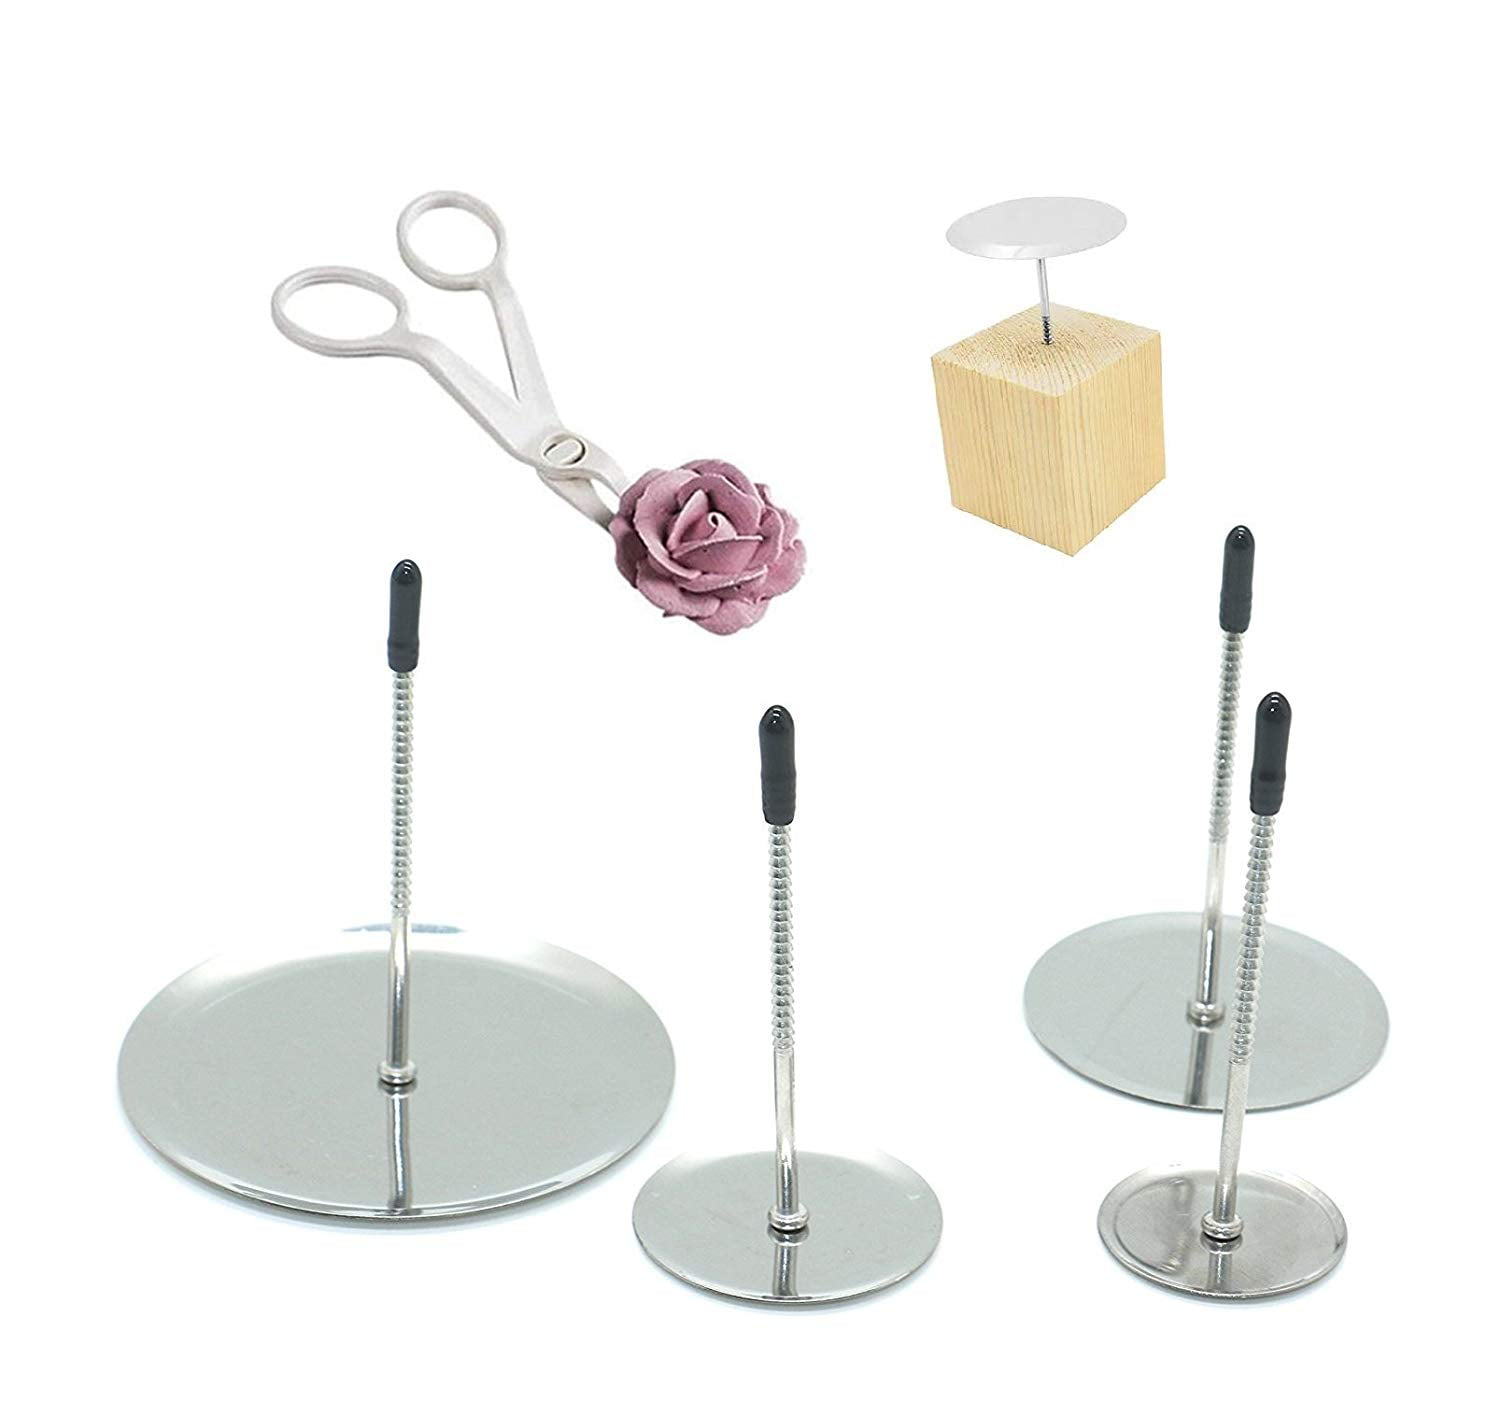 Cake flower nail & Flower Lifters & Wood Holder 6 Pcs/set, Stainless Steel  Cake Cupcake Decor Tools Baking Tools for Icing Flowers Decoration -  